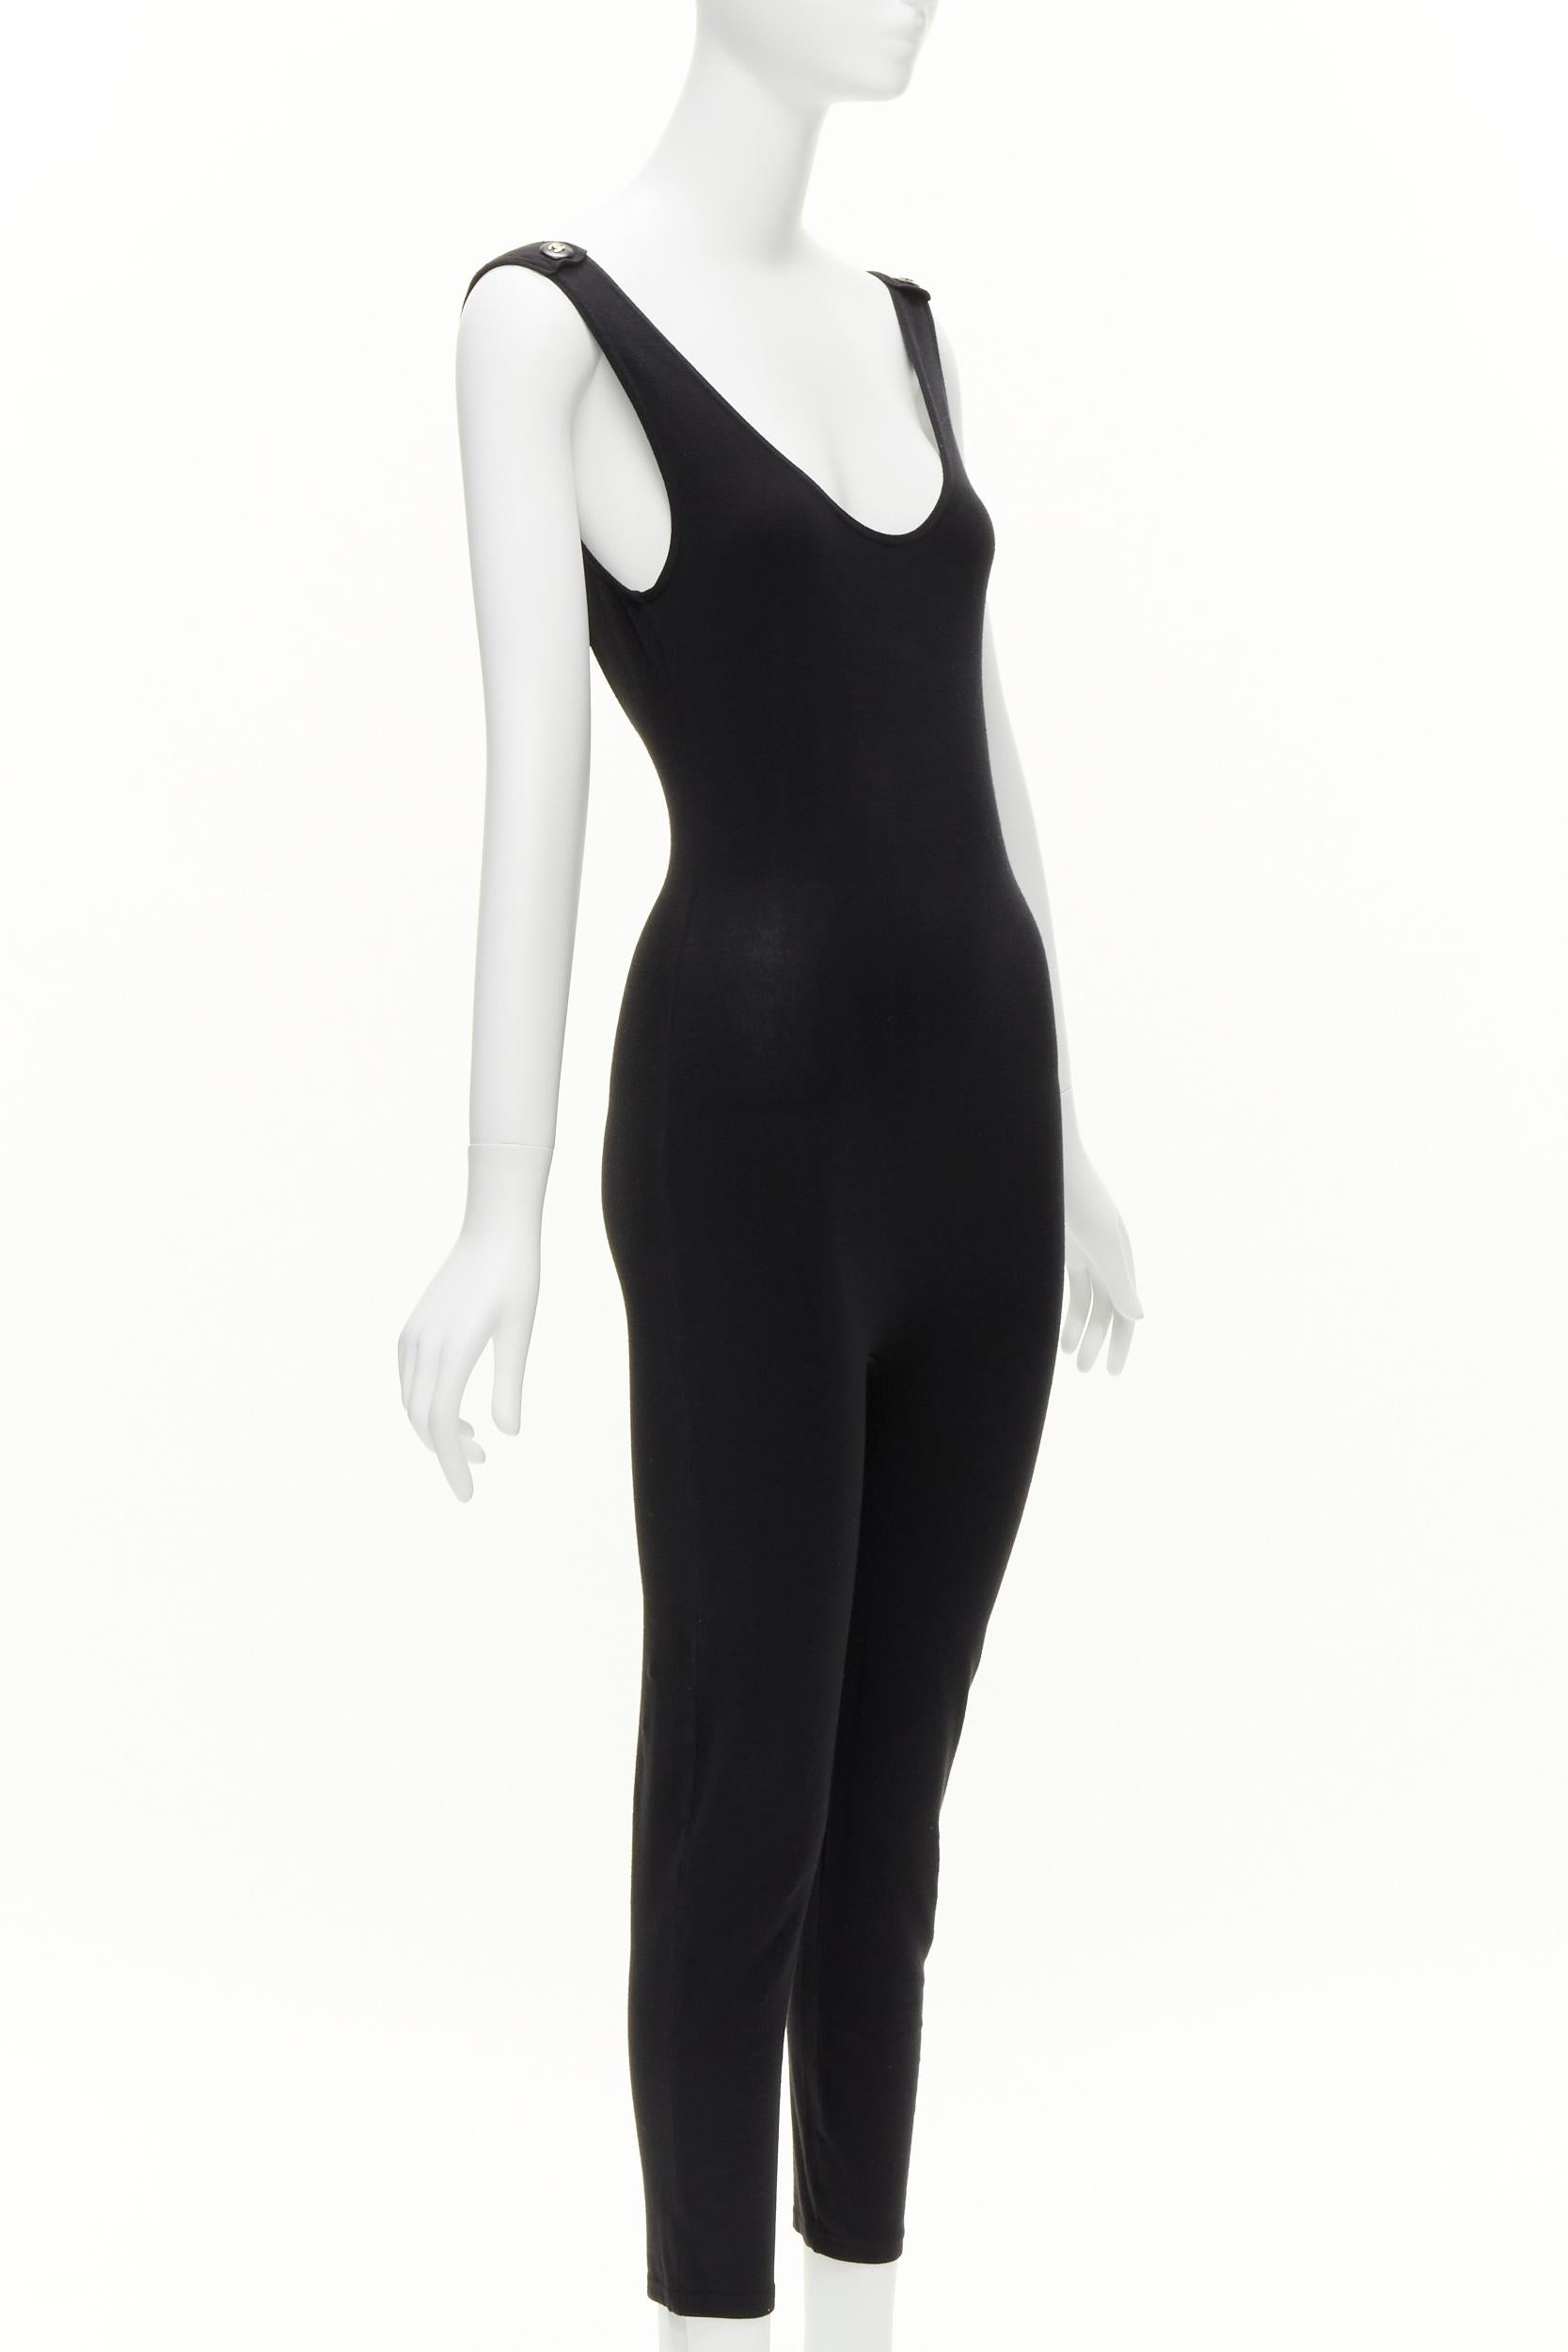 CHANEL Vintage 1990's gold CC logo button black backless cotton jumpsuit catsuit FR38 S
Reference: TGAS/C02021
Brand: Chanel
Designer: Karl Lagerfeld
Collection: FW 1990
Material: Cotton, Spandex
Color: Black
Pattern: Solid
Closure: Pullover
Extra